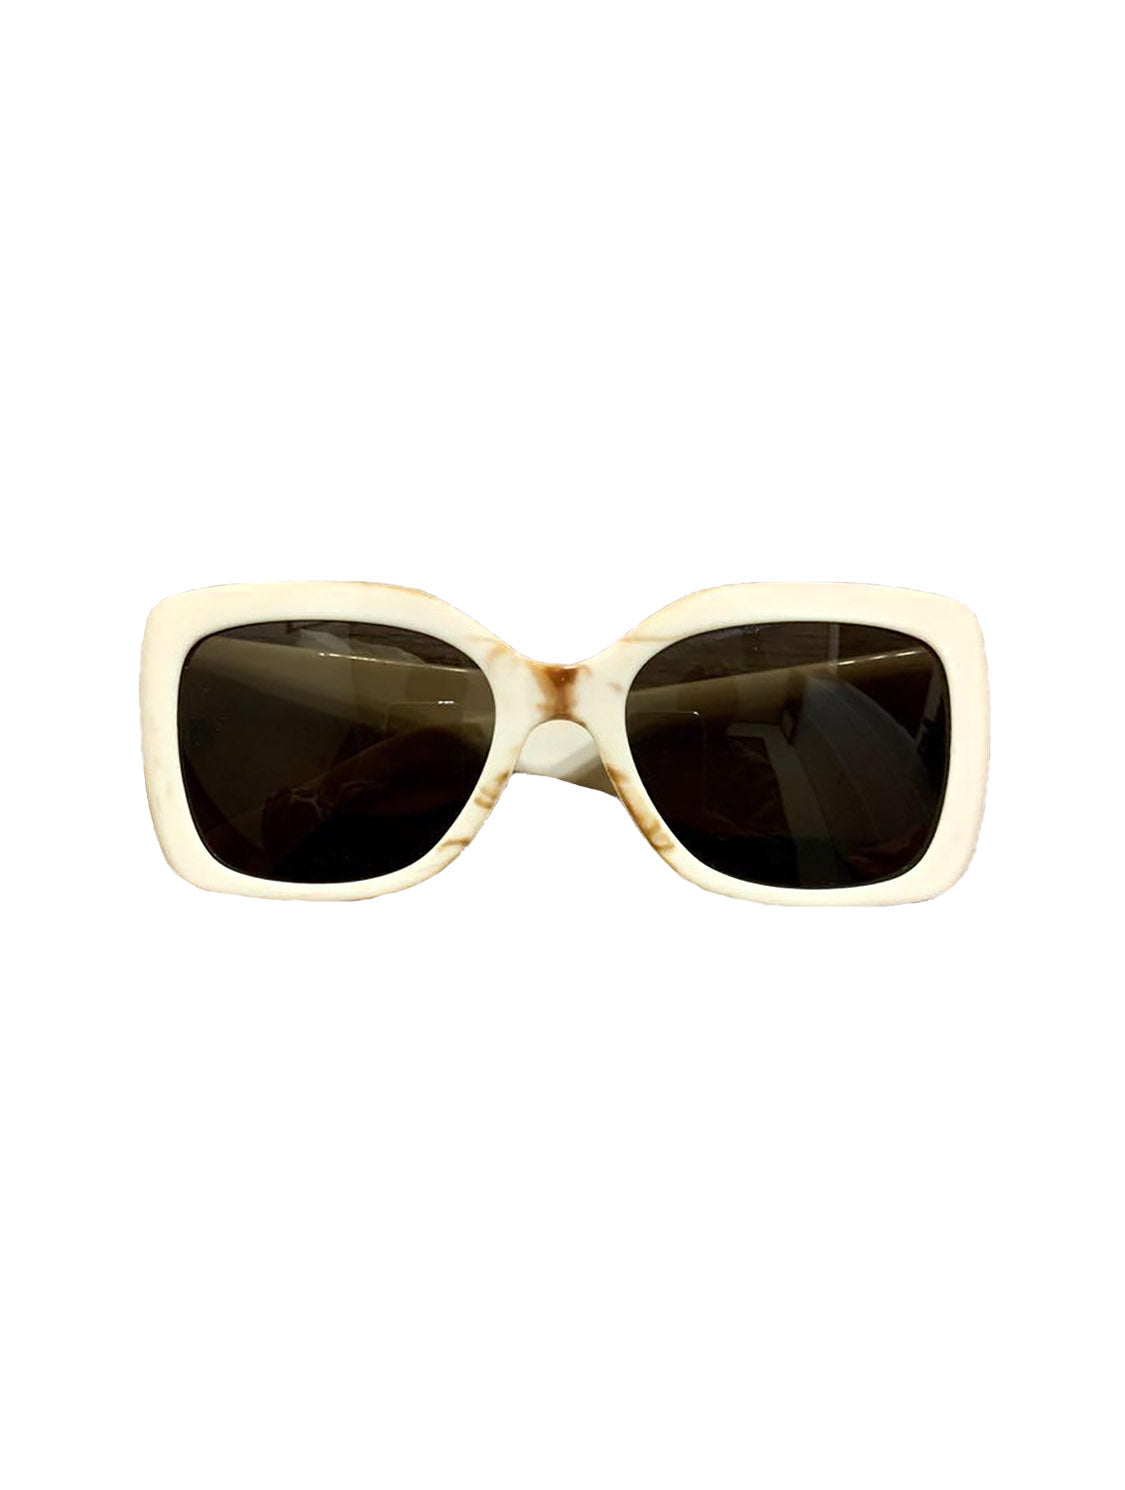 CHANEL, Accessories, Chanel Butterfly Sunglasses Acetate Black Beige